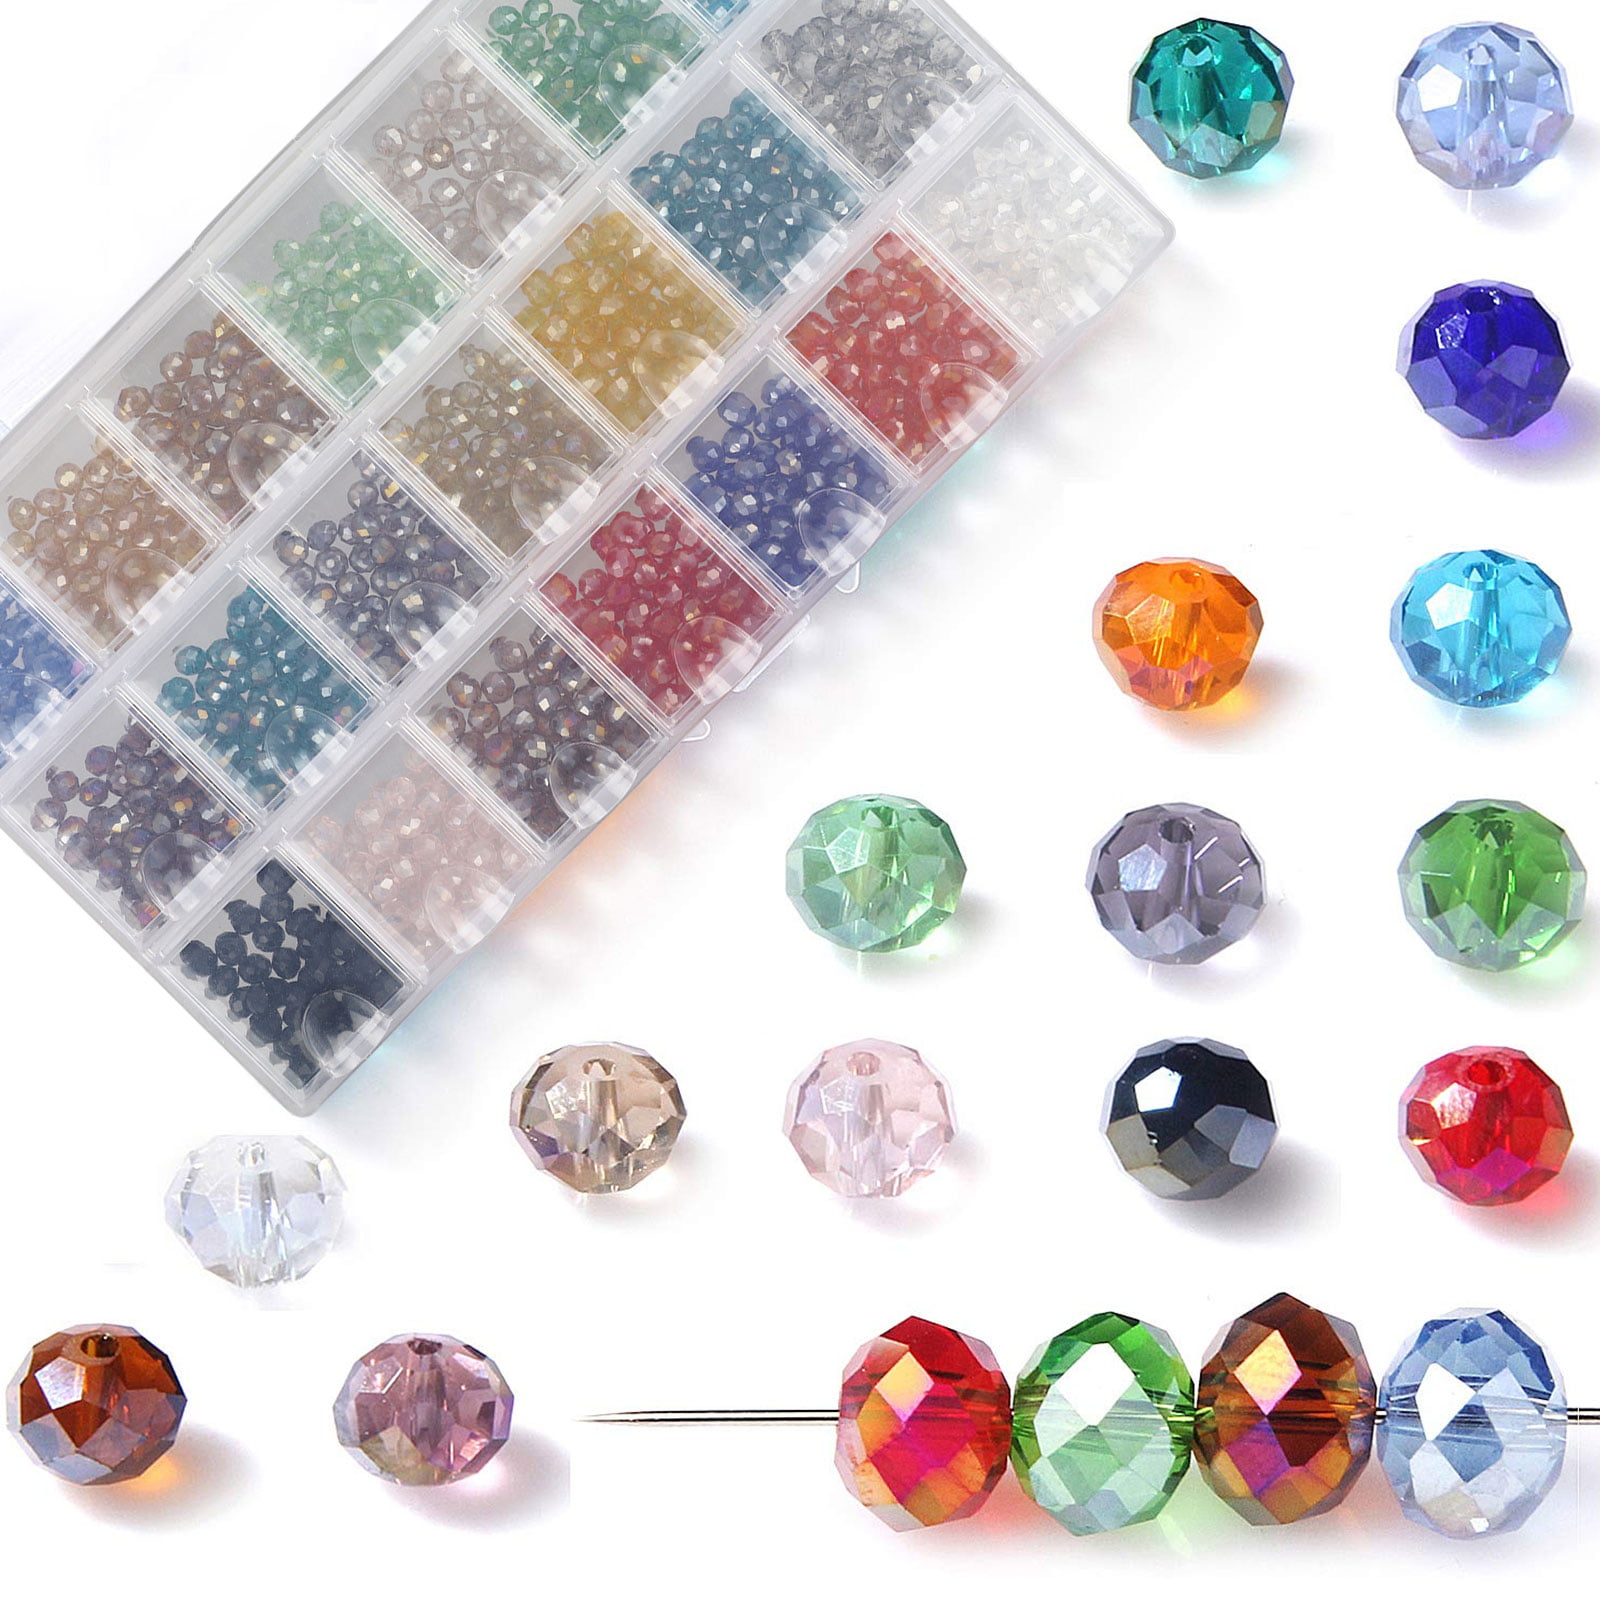 Beads 100-500 3x2mm Findings Glass Faceted Spacer Crystal Jewelry Rondelle pcs 